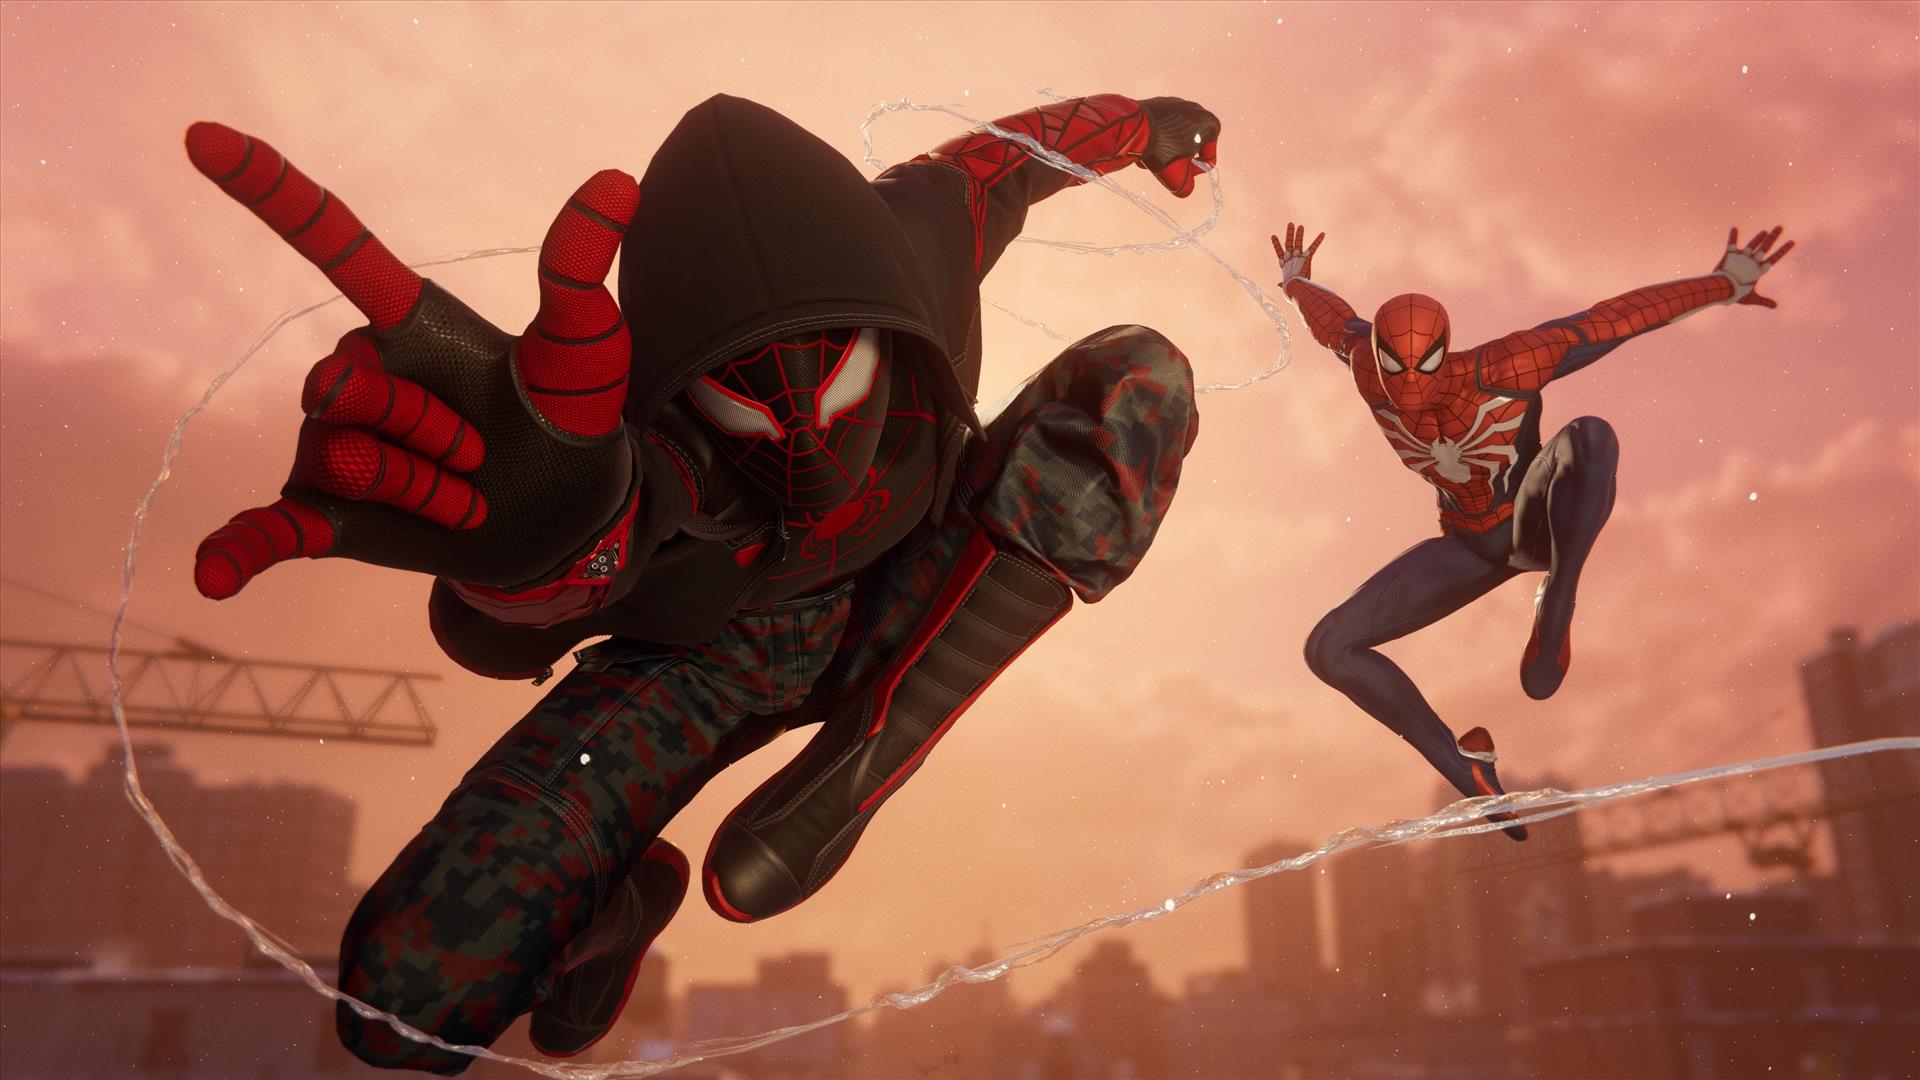 SPIDER-MAN MILES MORALES ULTIMATE EDITION